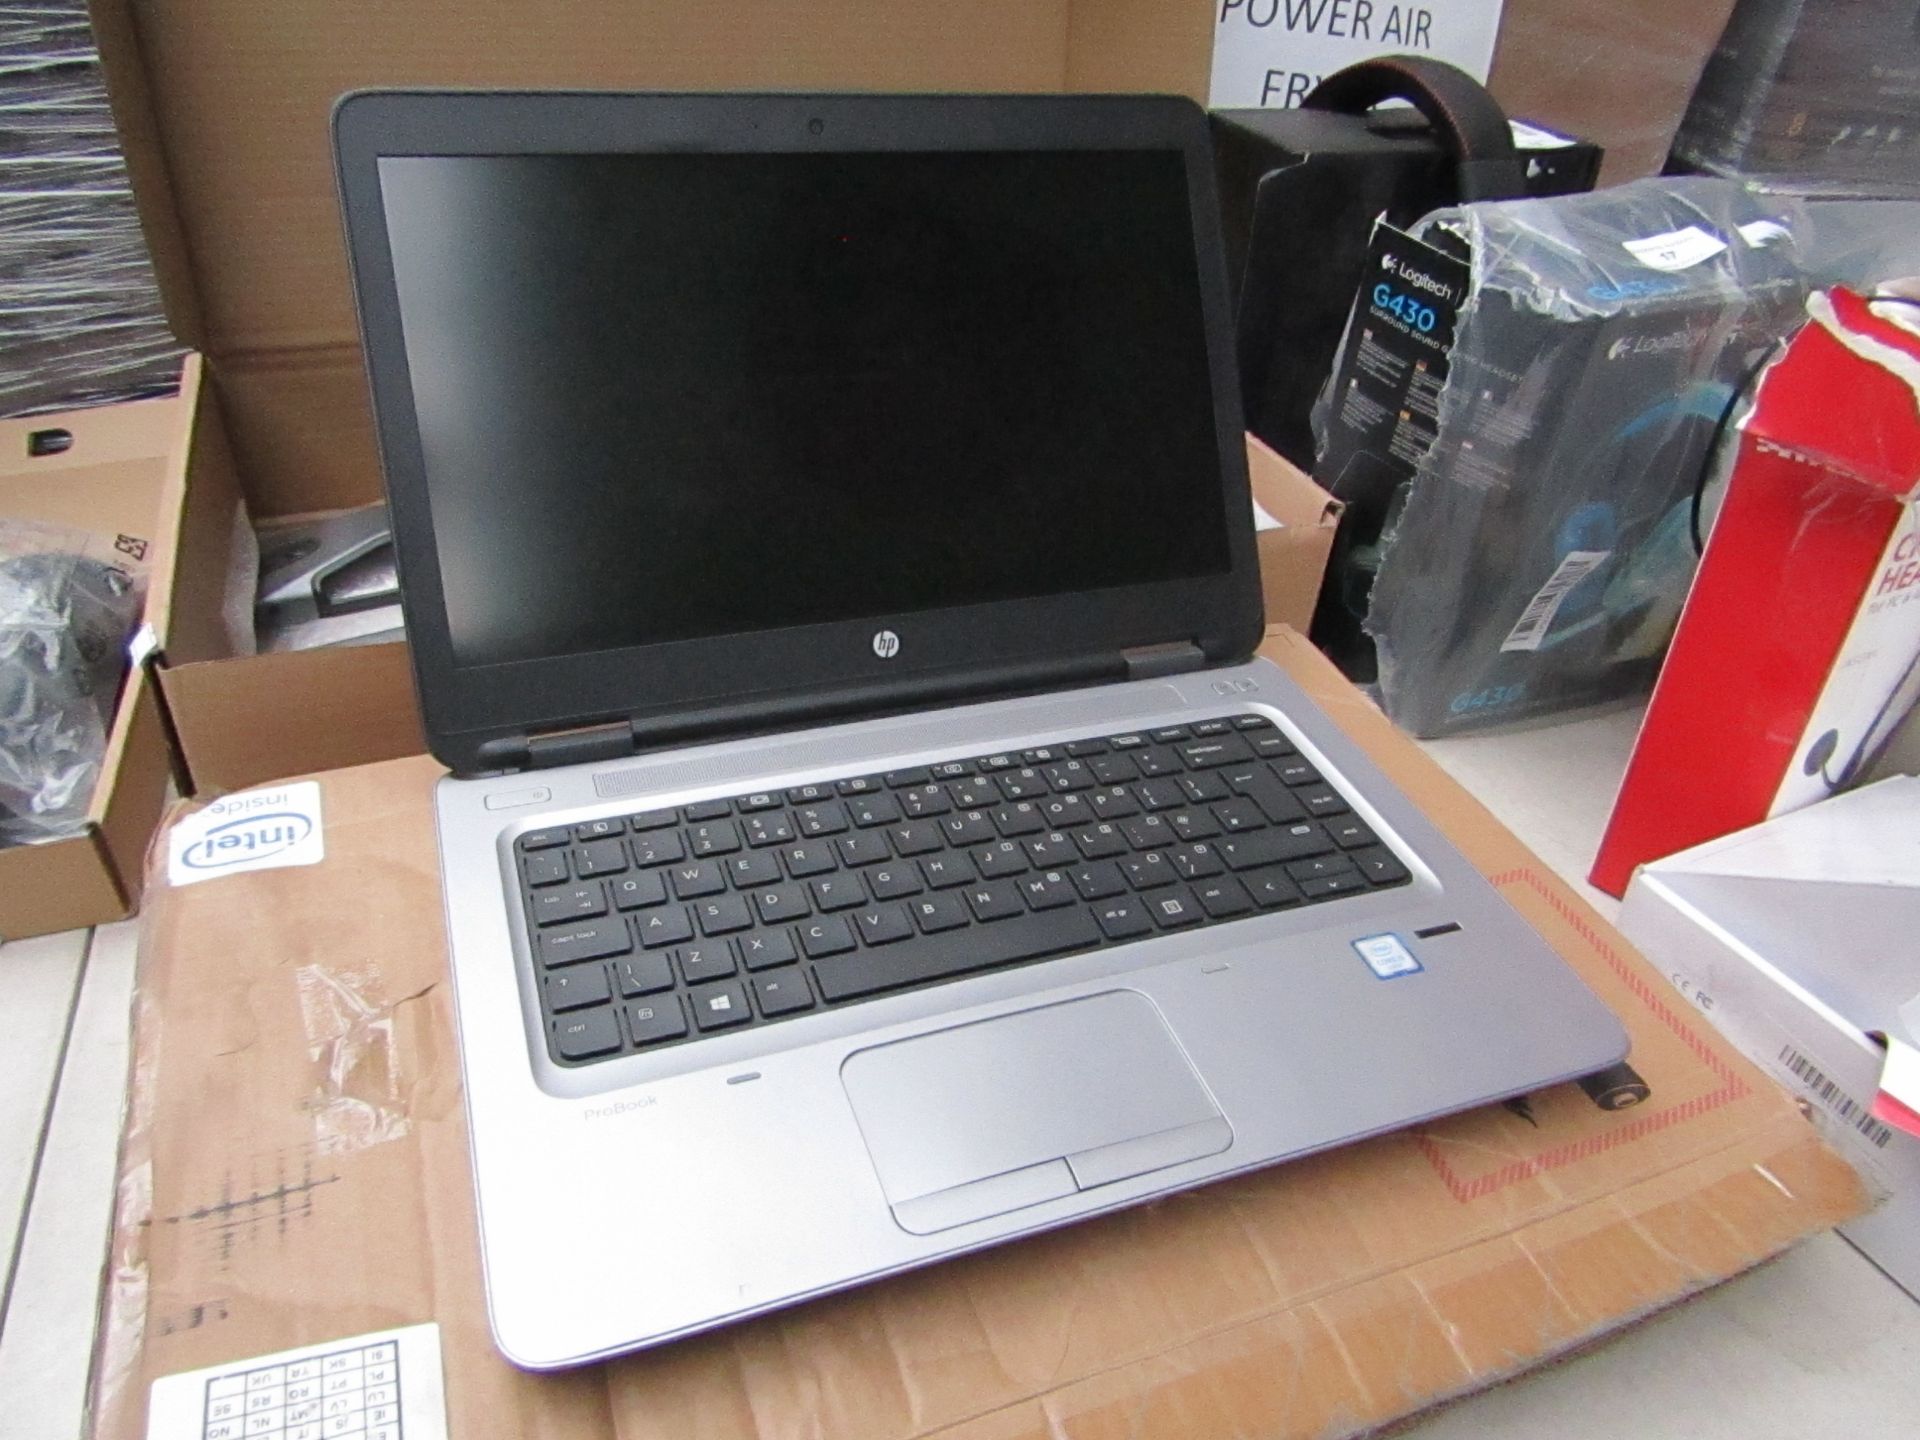 HP ProBook 640 G2 with an I5 processor, smashed screen. Boxed, no charger, when new it retails for